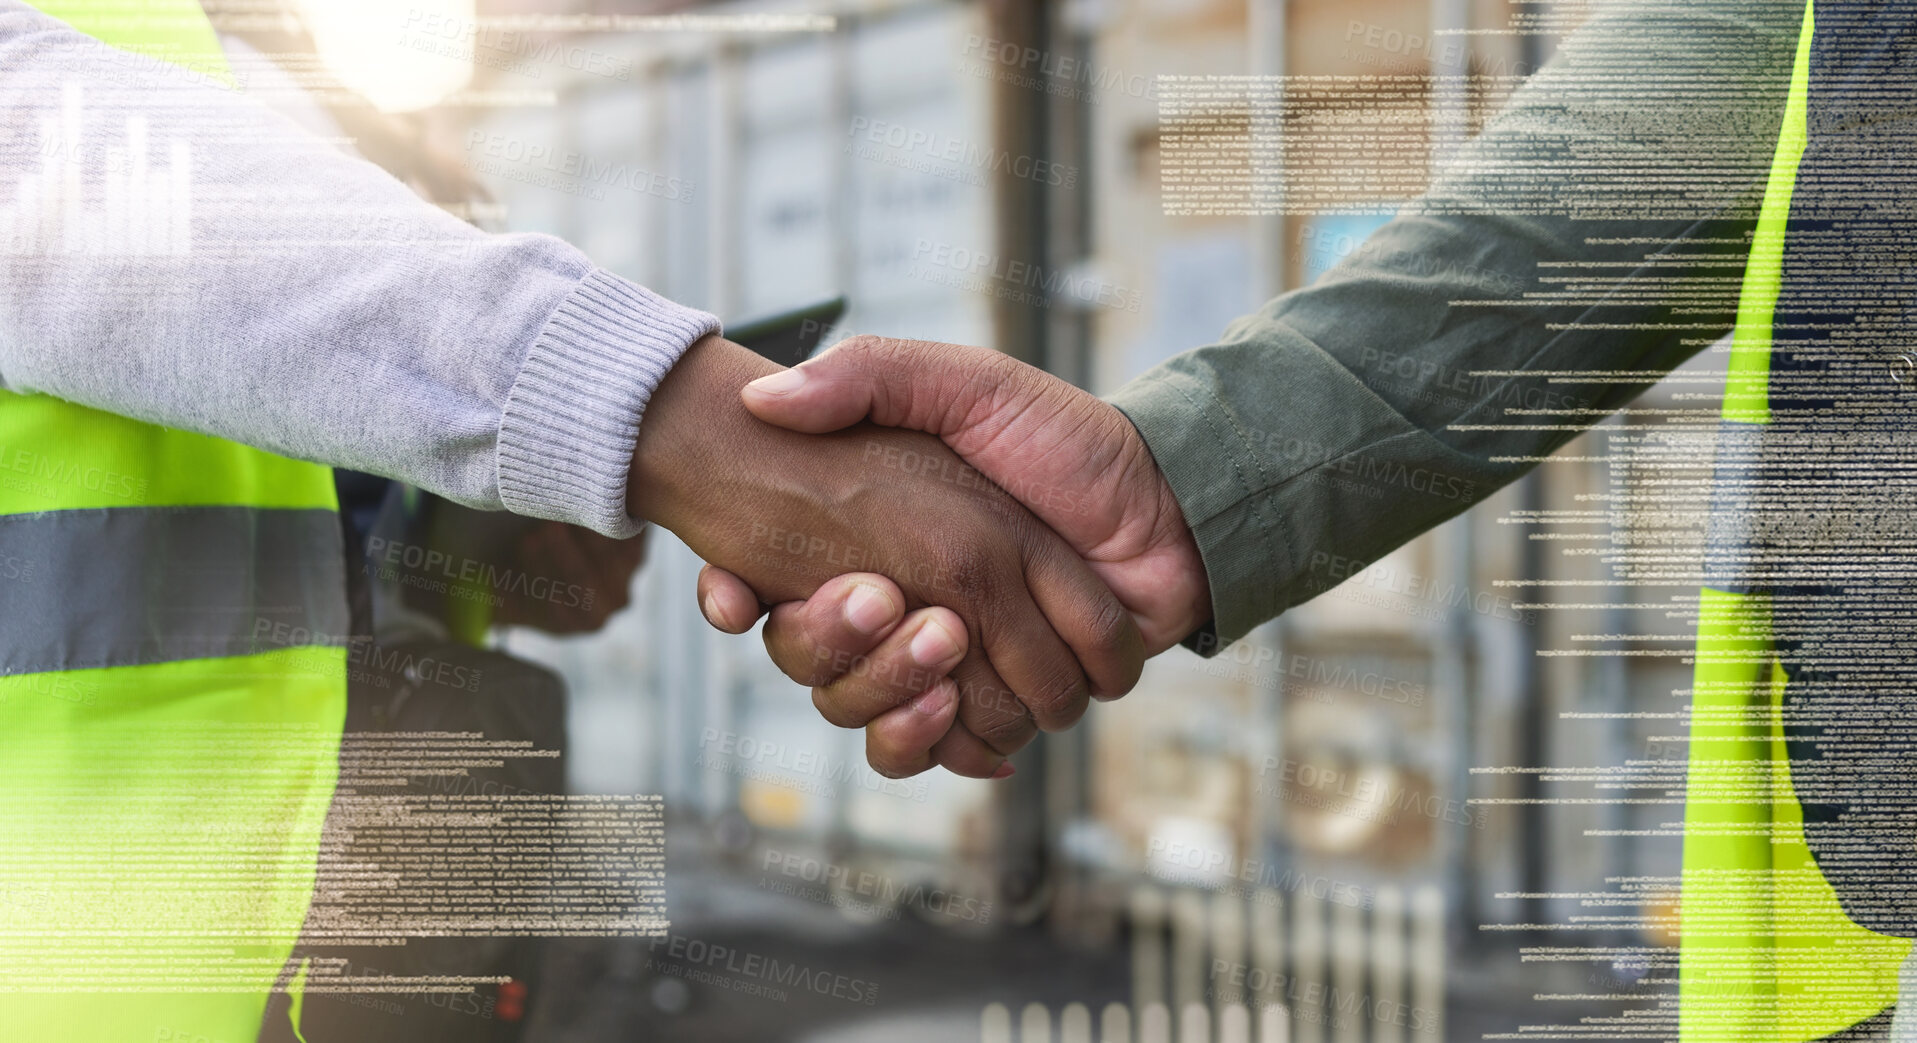 Buy stock photo Logistics handshake, construction team or black workers doing b2b business at distribution warehouse. Shipping employees with welcome, networking or partnership meeting at container factory storage